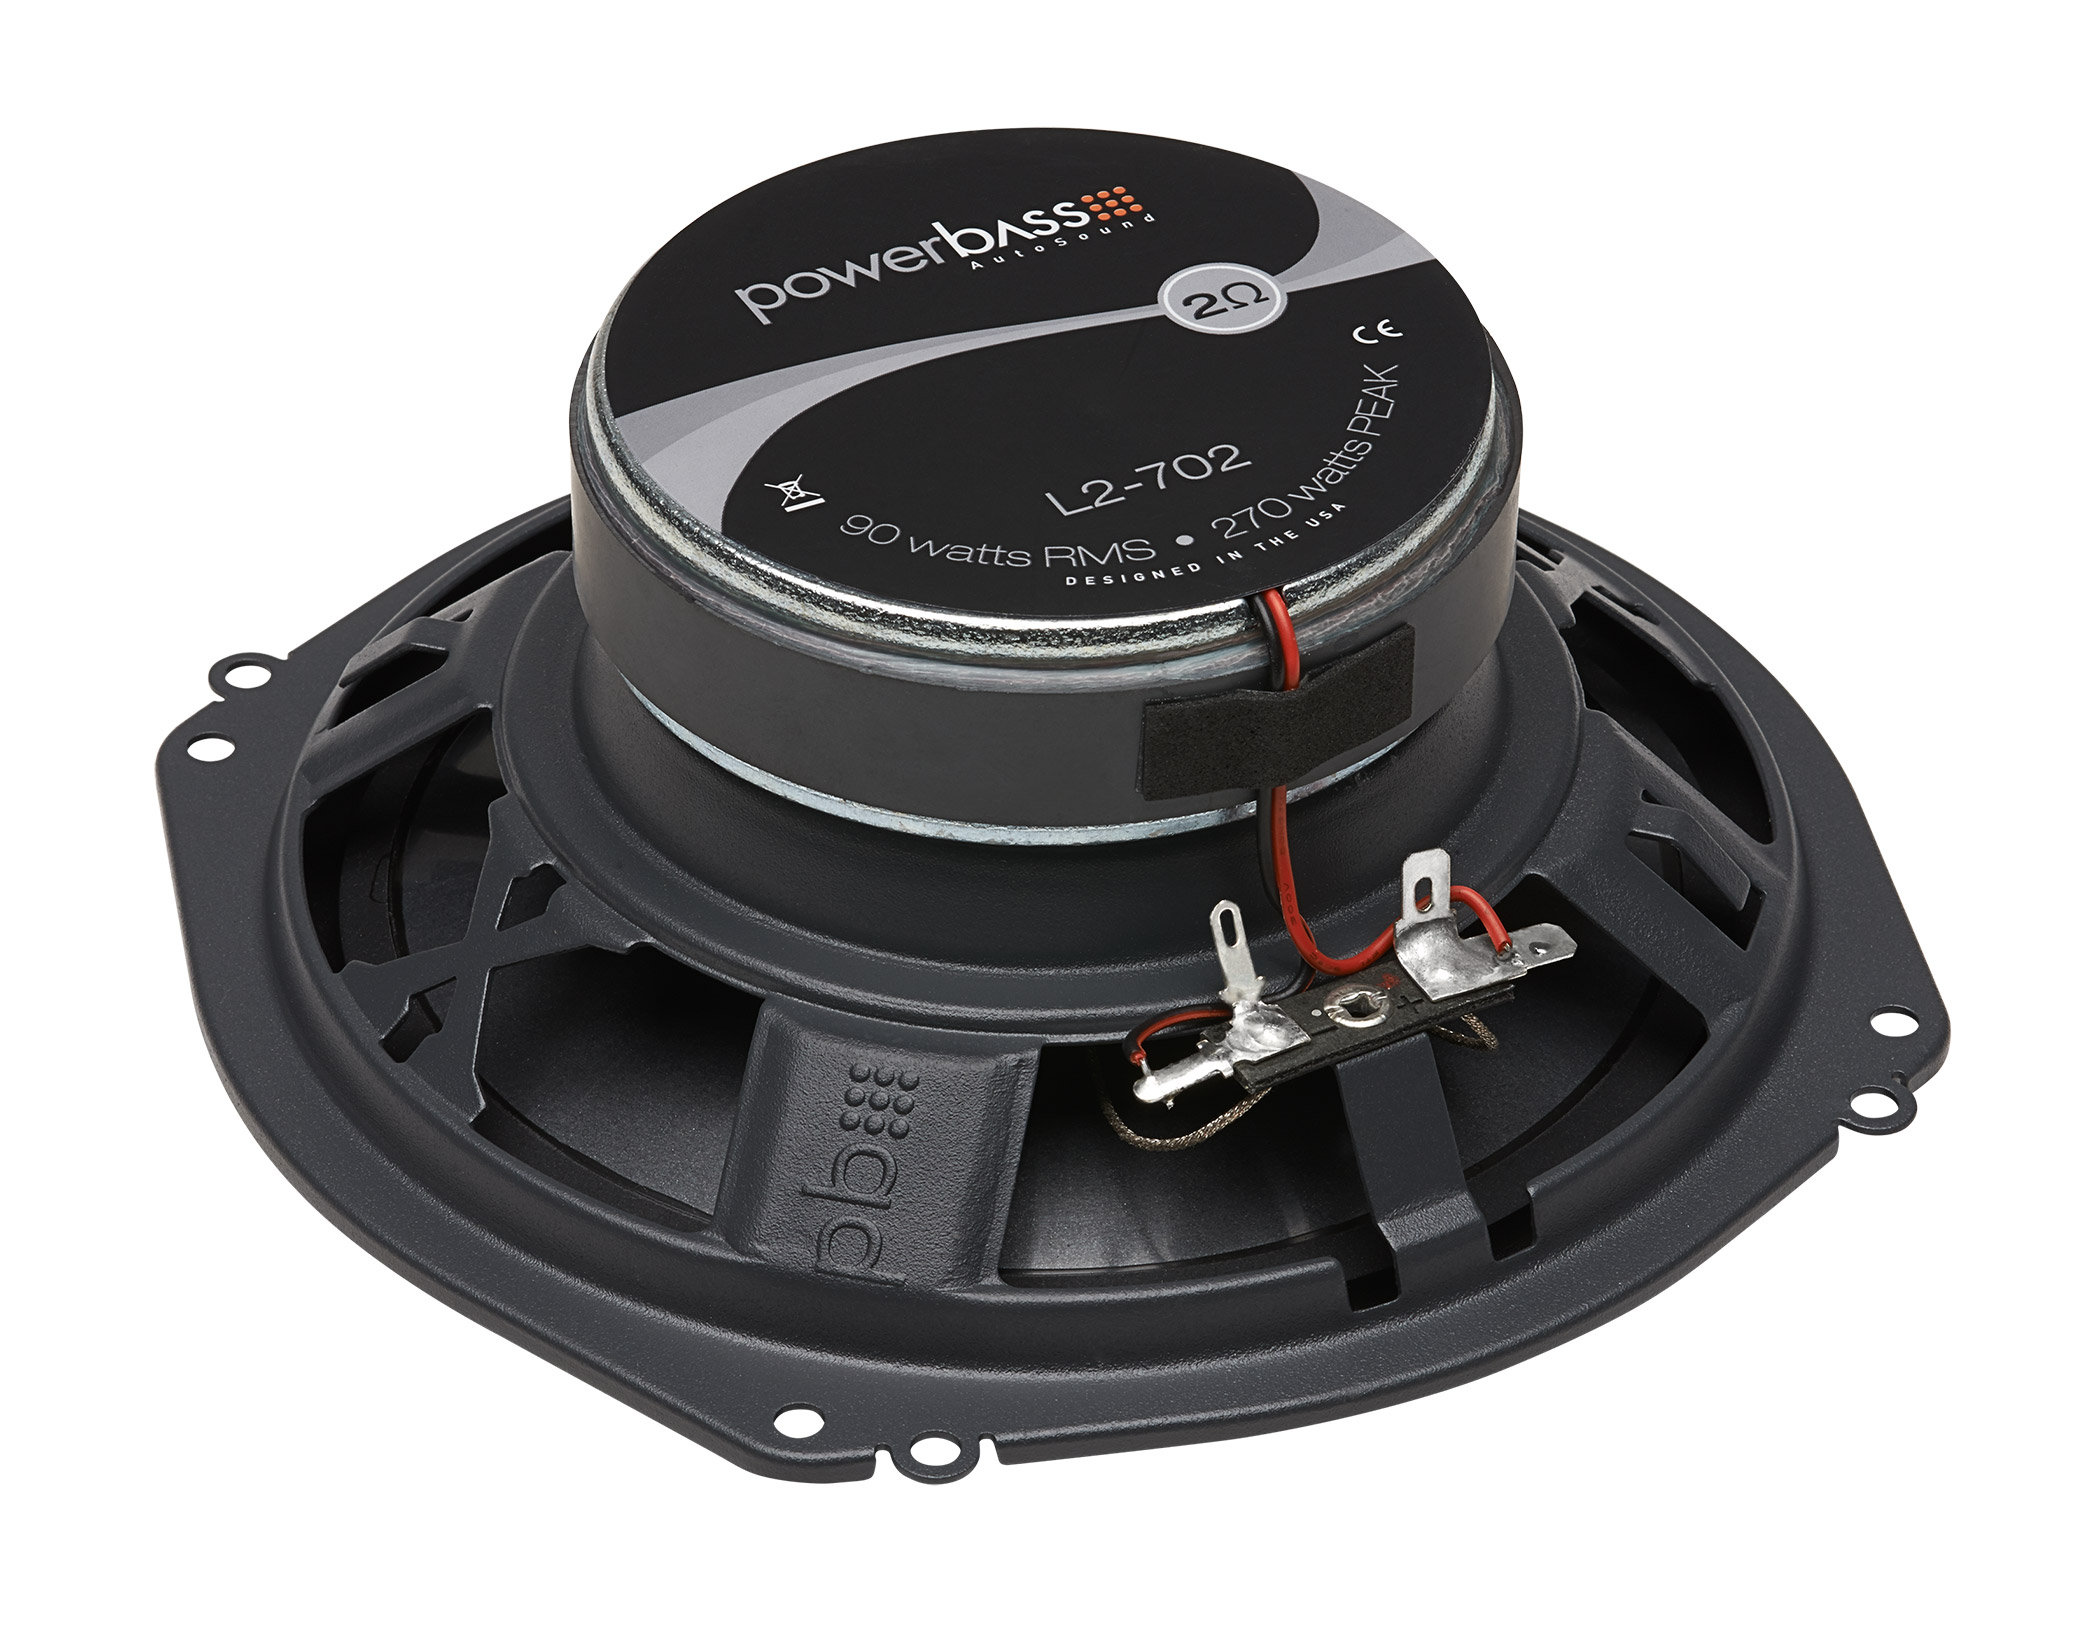 Powerbass L2-702 Coaxial Speakers Review